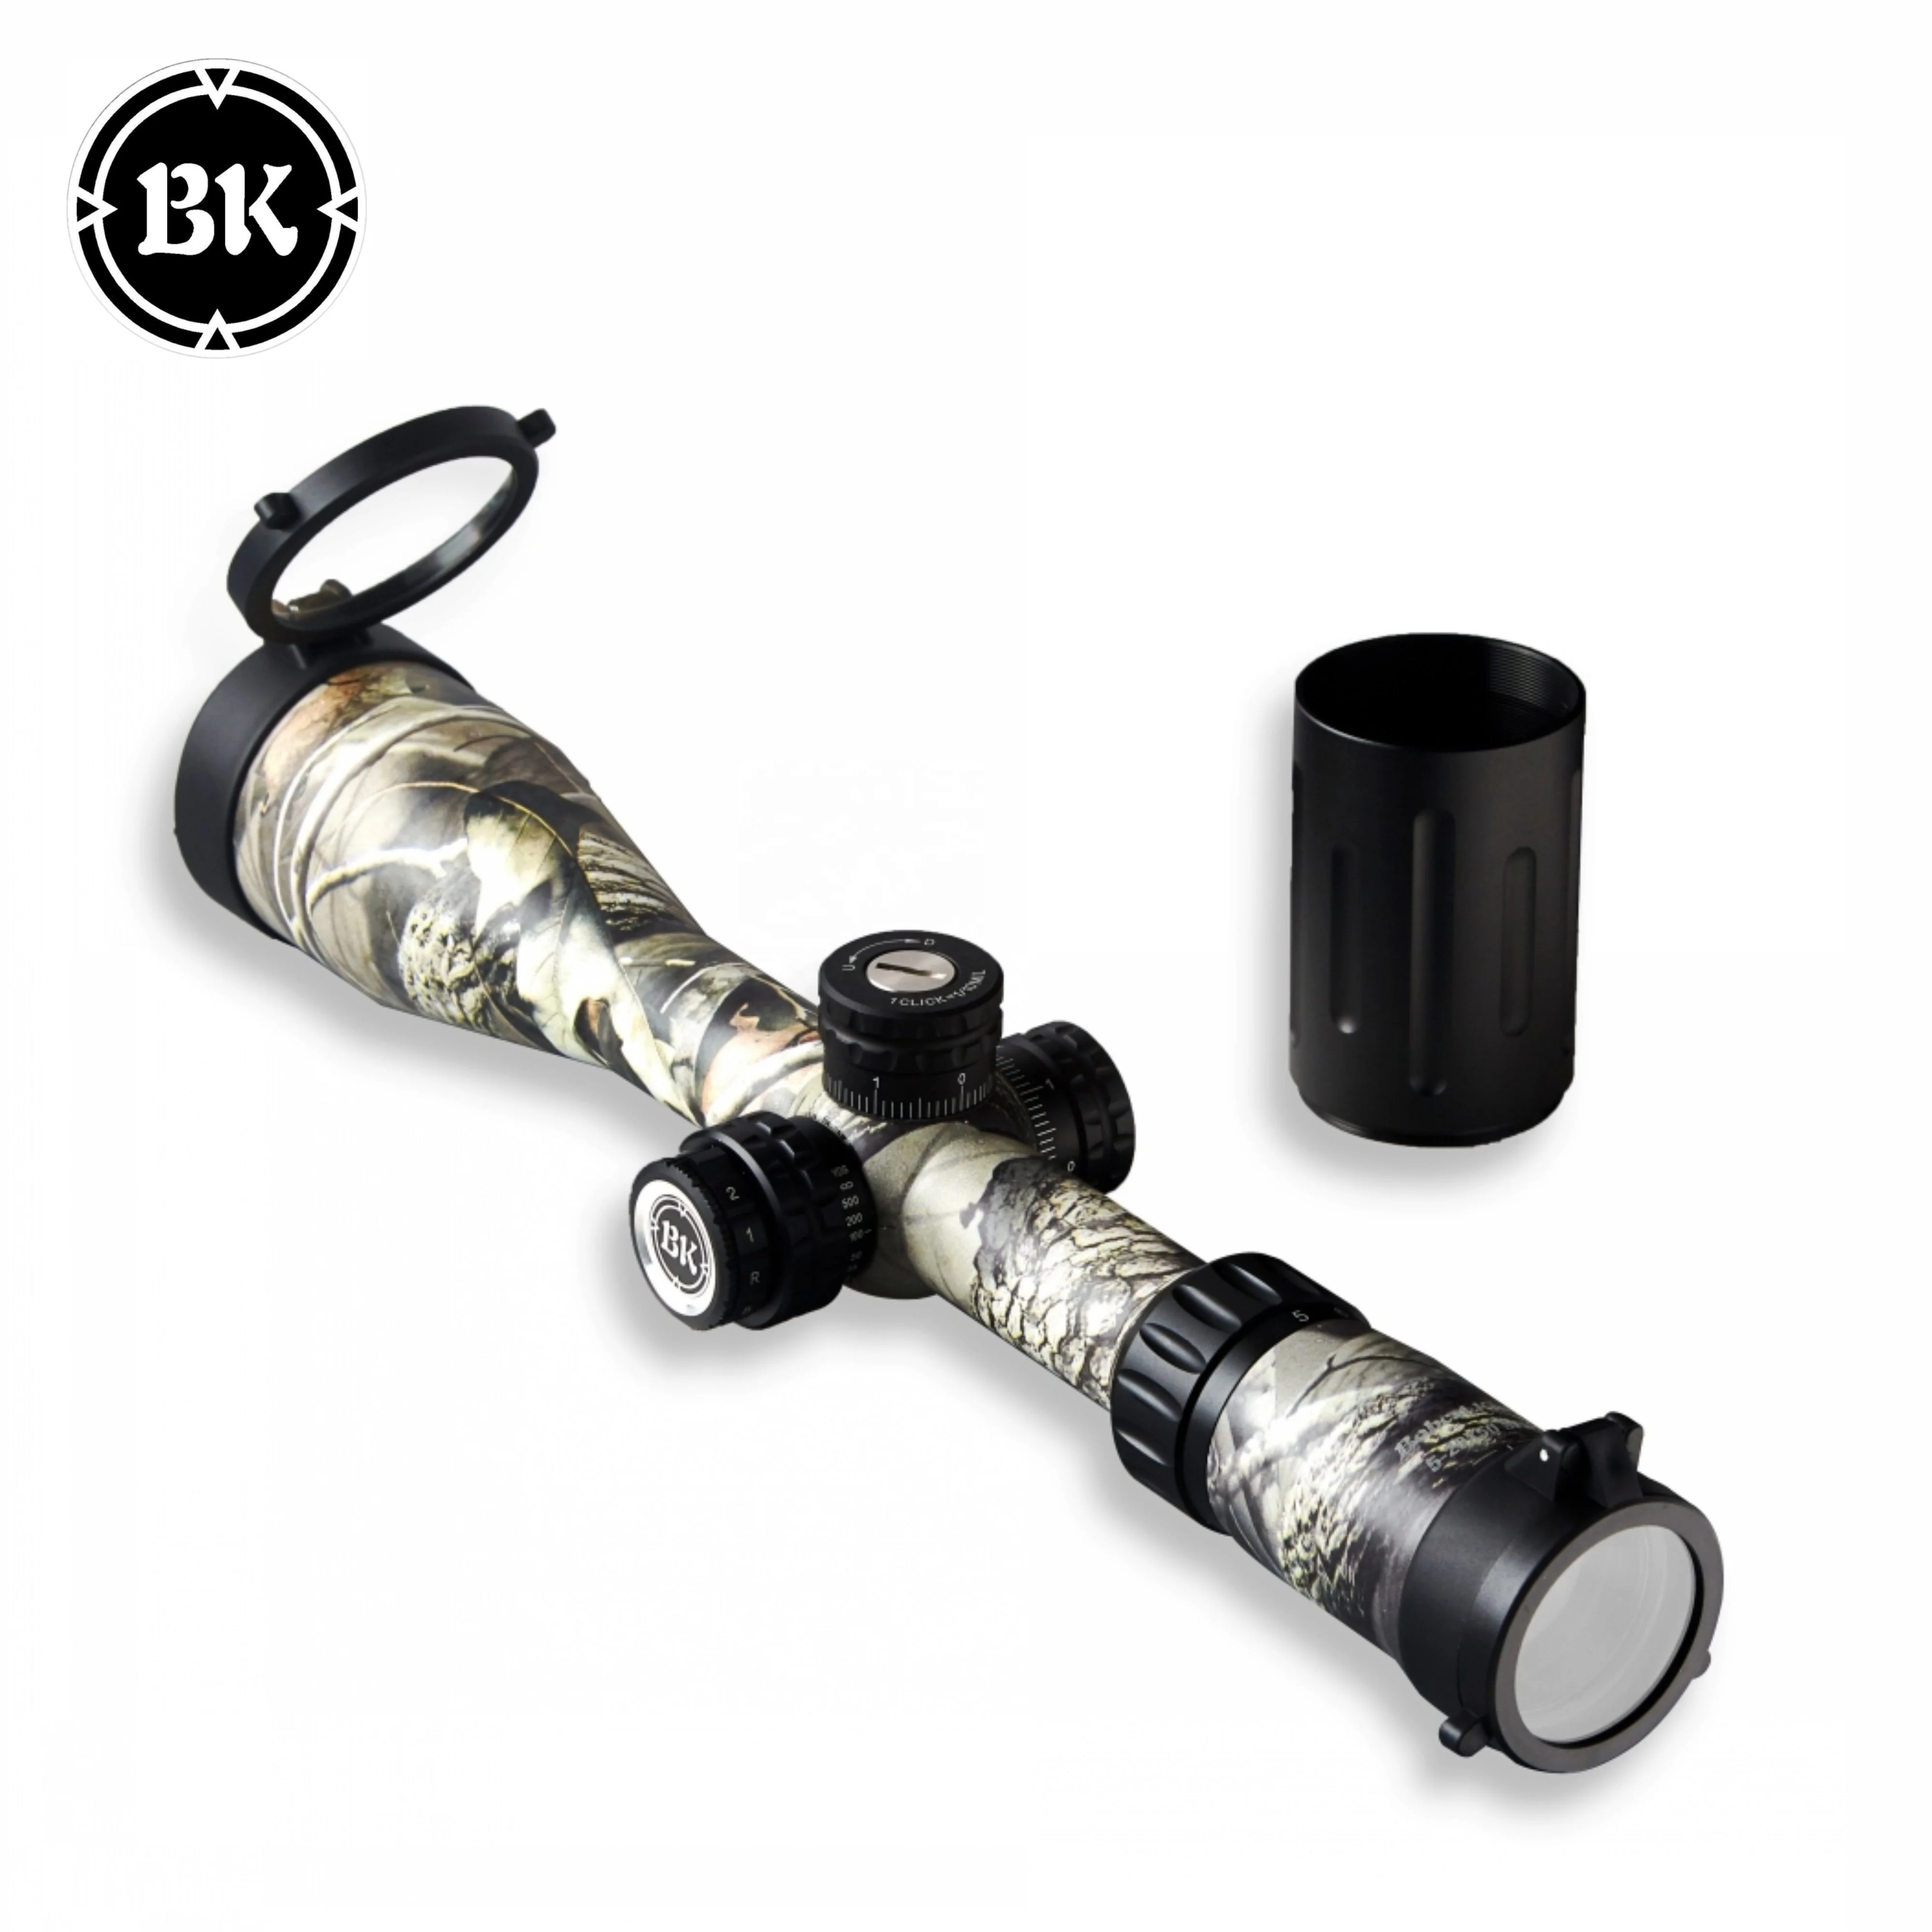 

Bobcat King 5-20X50 SFIR Riflescope Airsoft Hunting Rifle Scope Traffic Light Illumination Sniper Tactical Optical Sight, Camouflage color